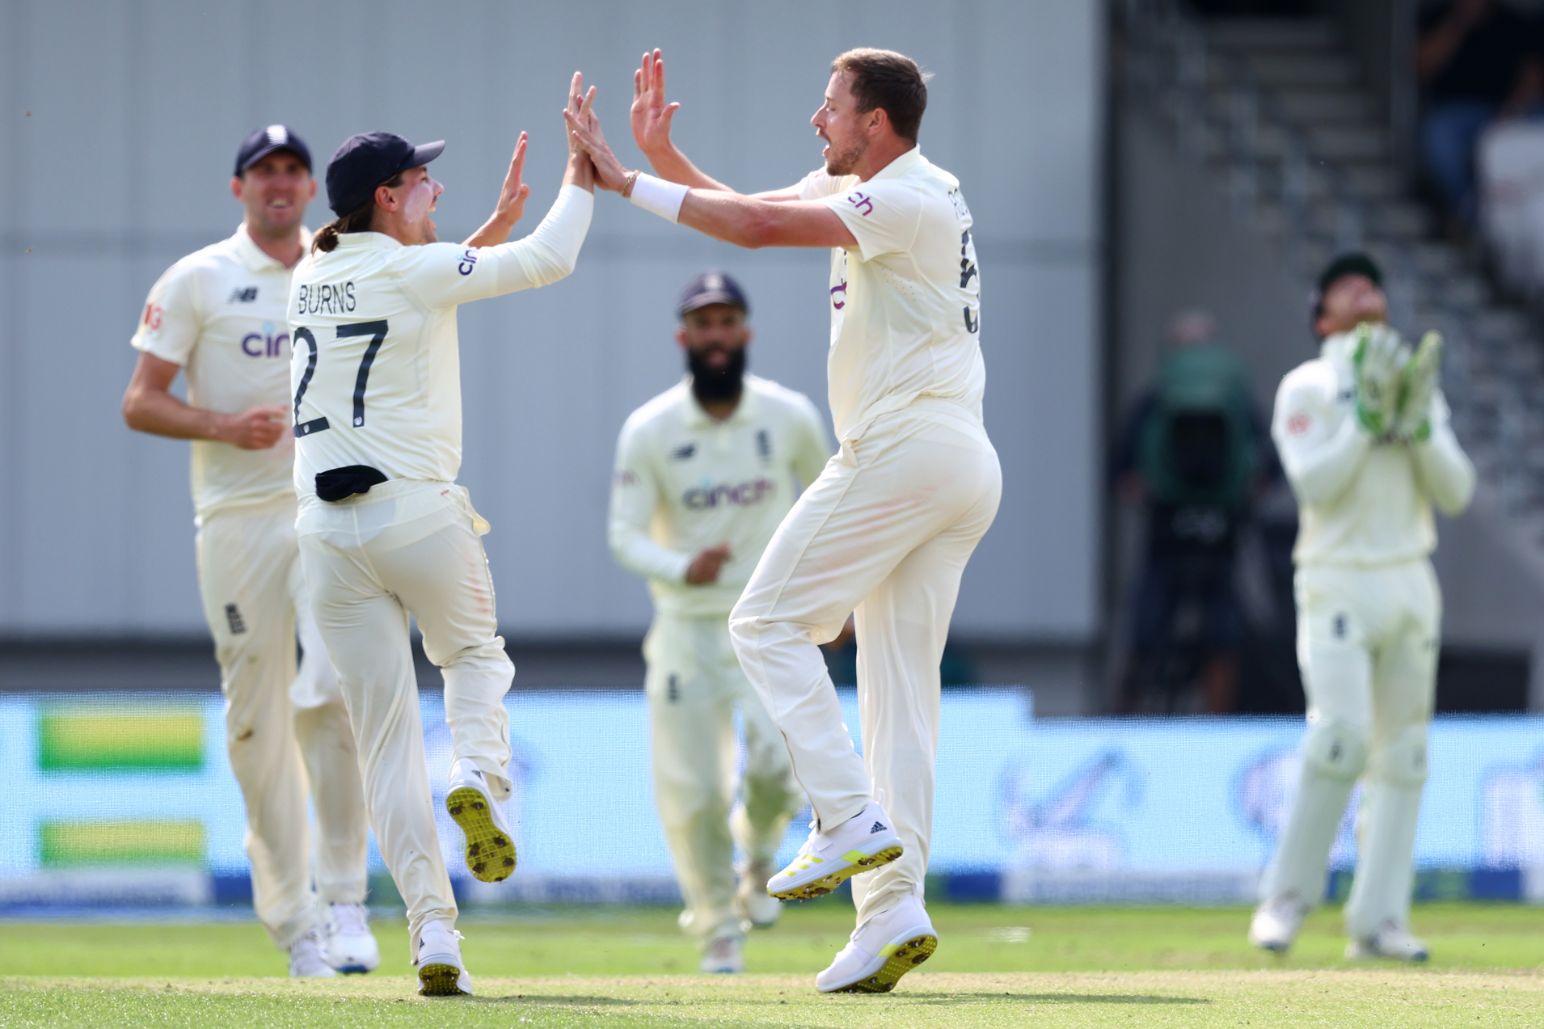 England announce revamped central contracts; Ollie Robinson, Jack Leach, Malan get their first